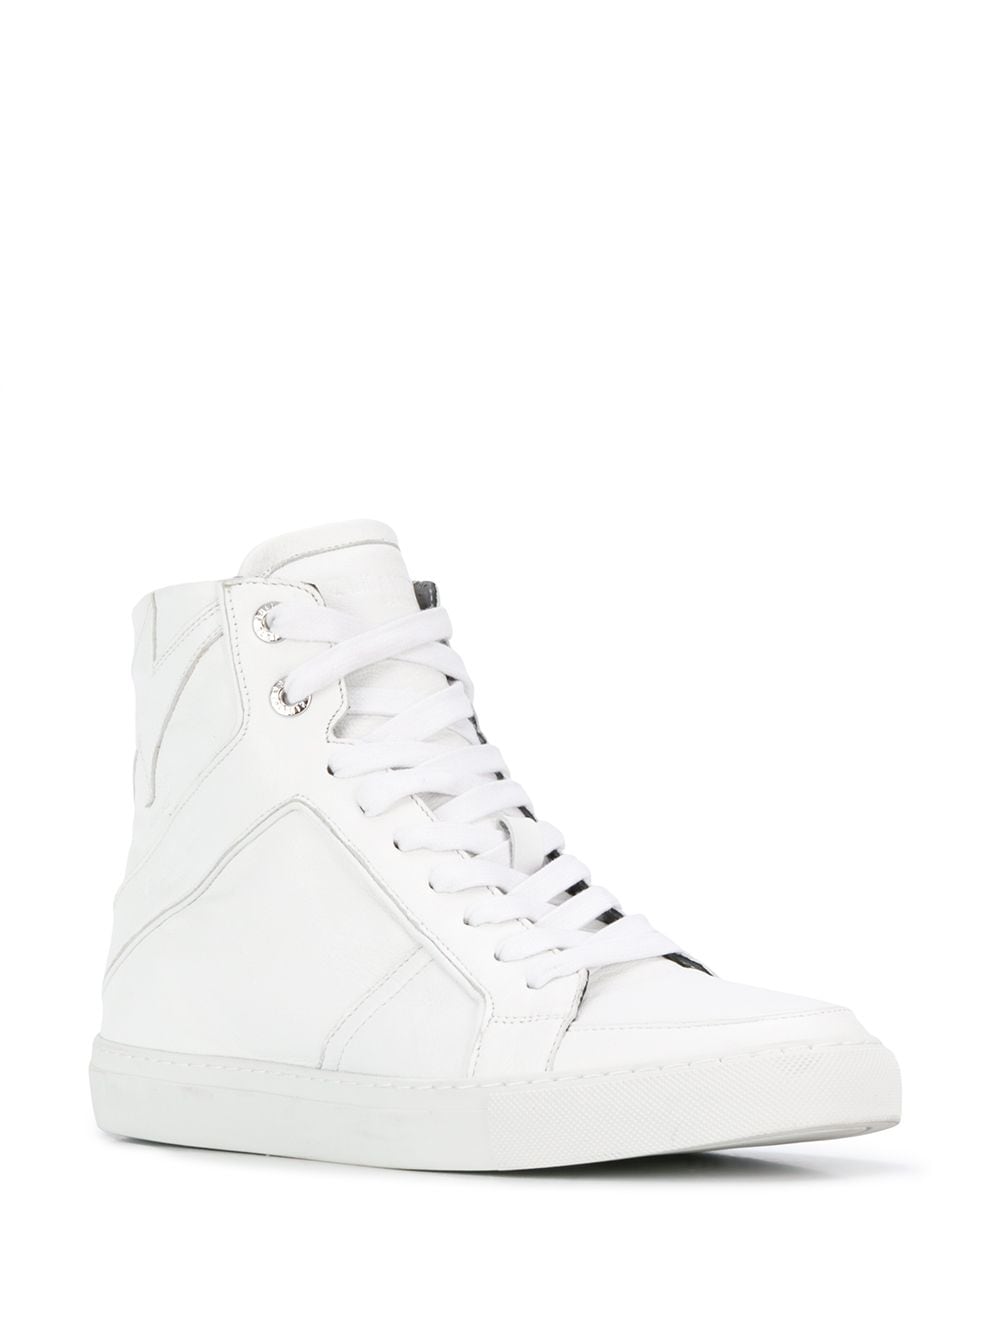 Image 2 of Zadig&Voltaire High Flash lace-up sneakers